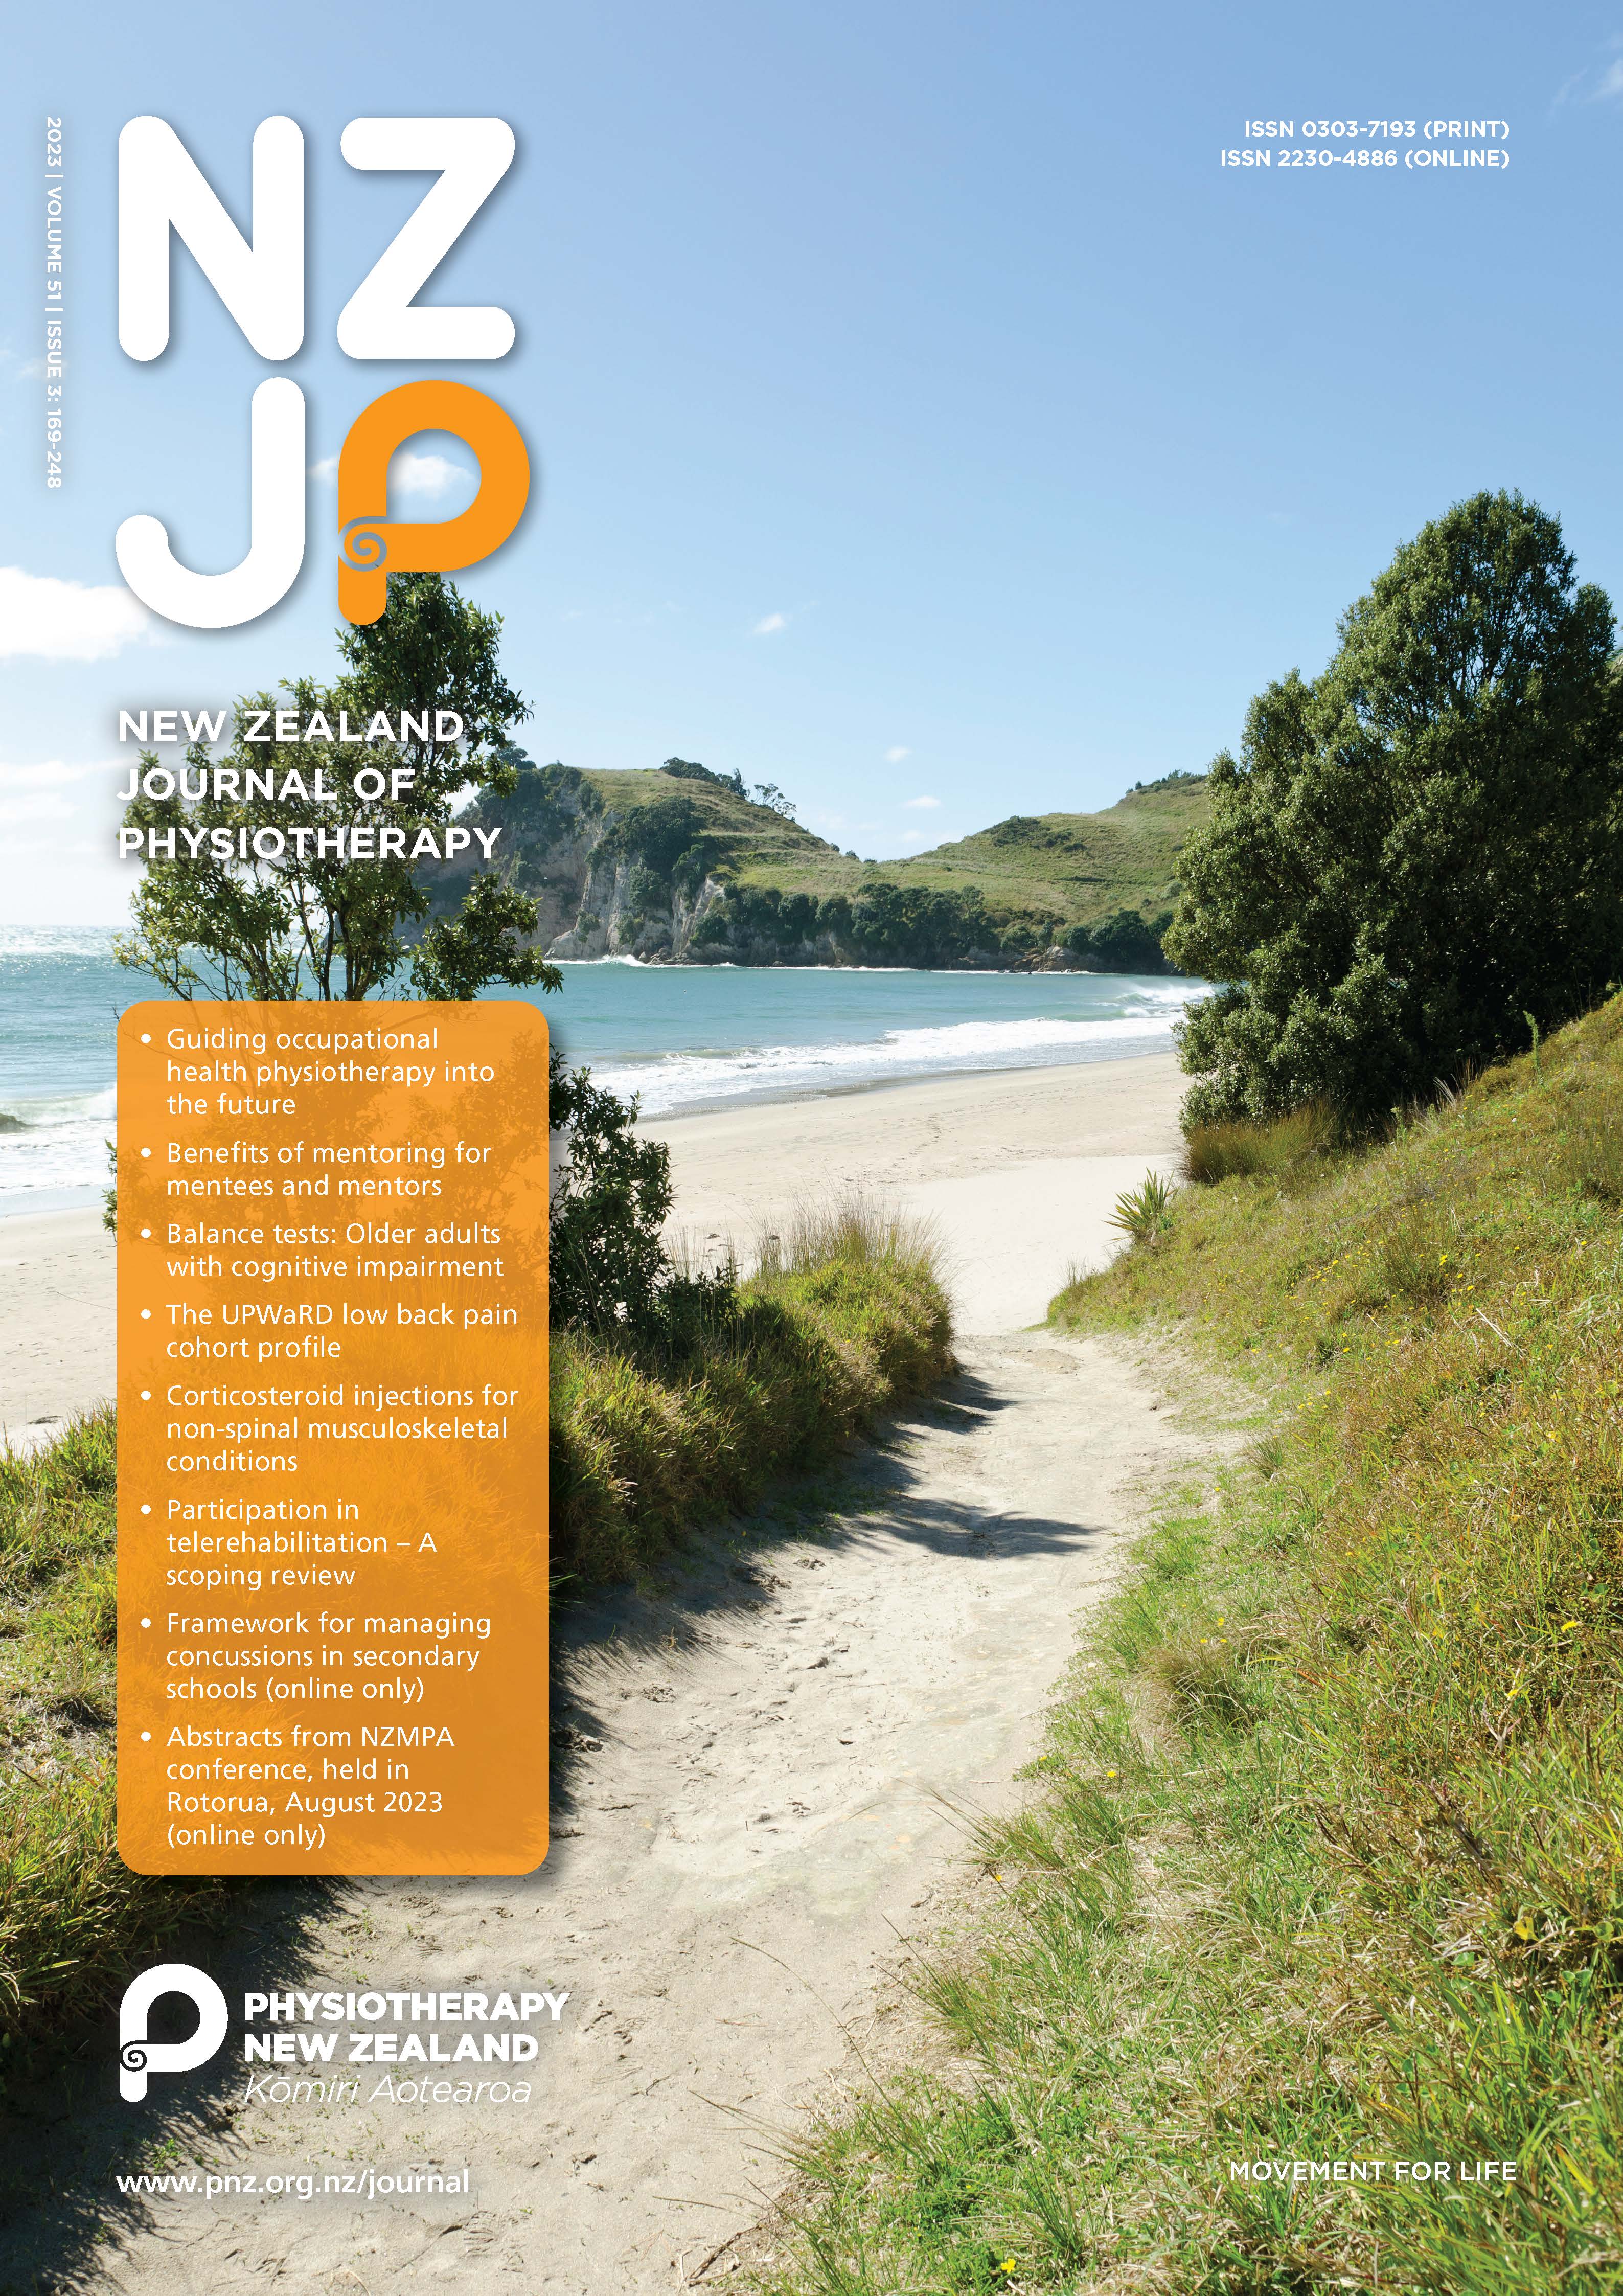 					View Vol. 51 No. 3 (2023): New Zealand Journal of Physiotherapy
				